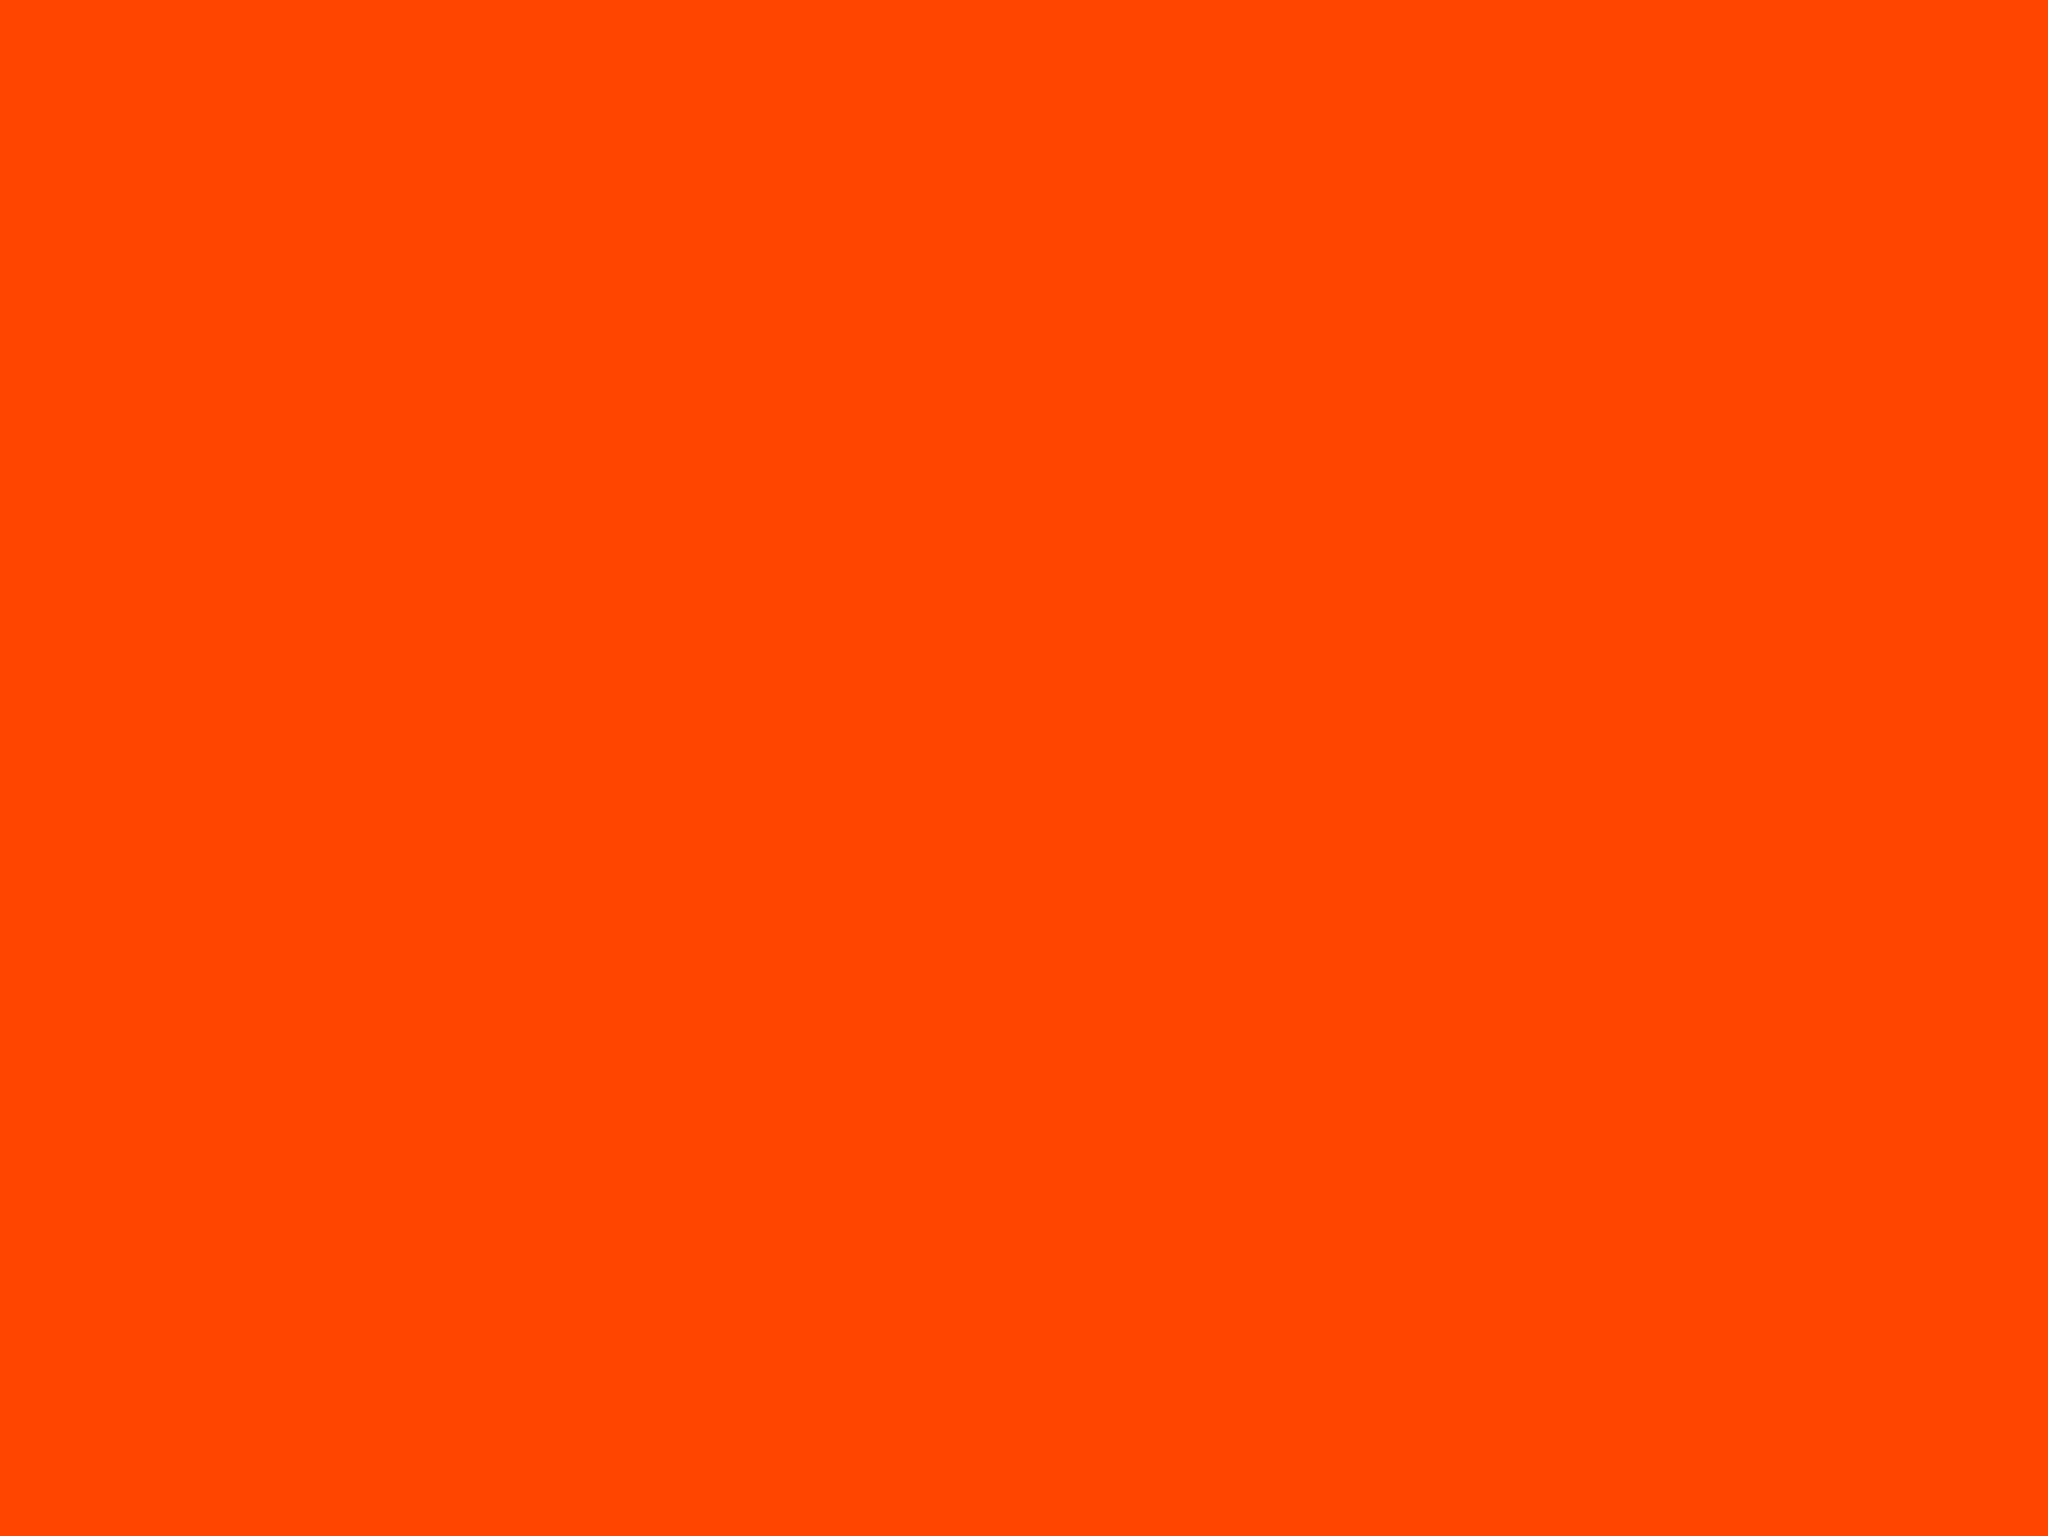 Red and Orange - wide 6